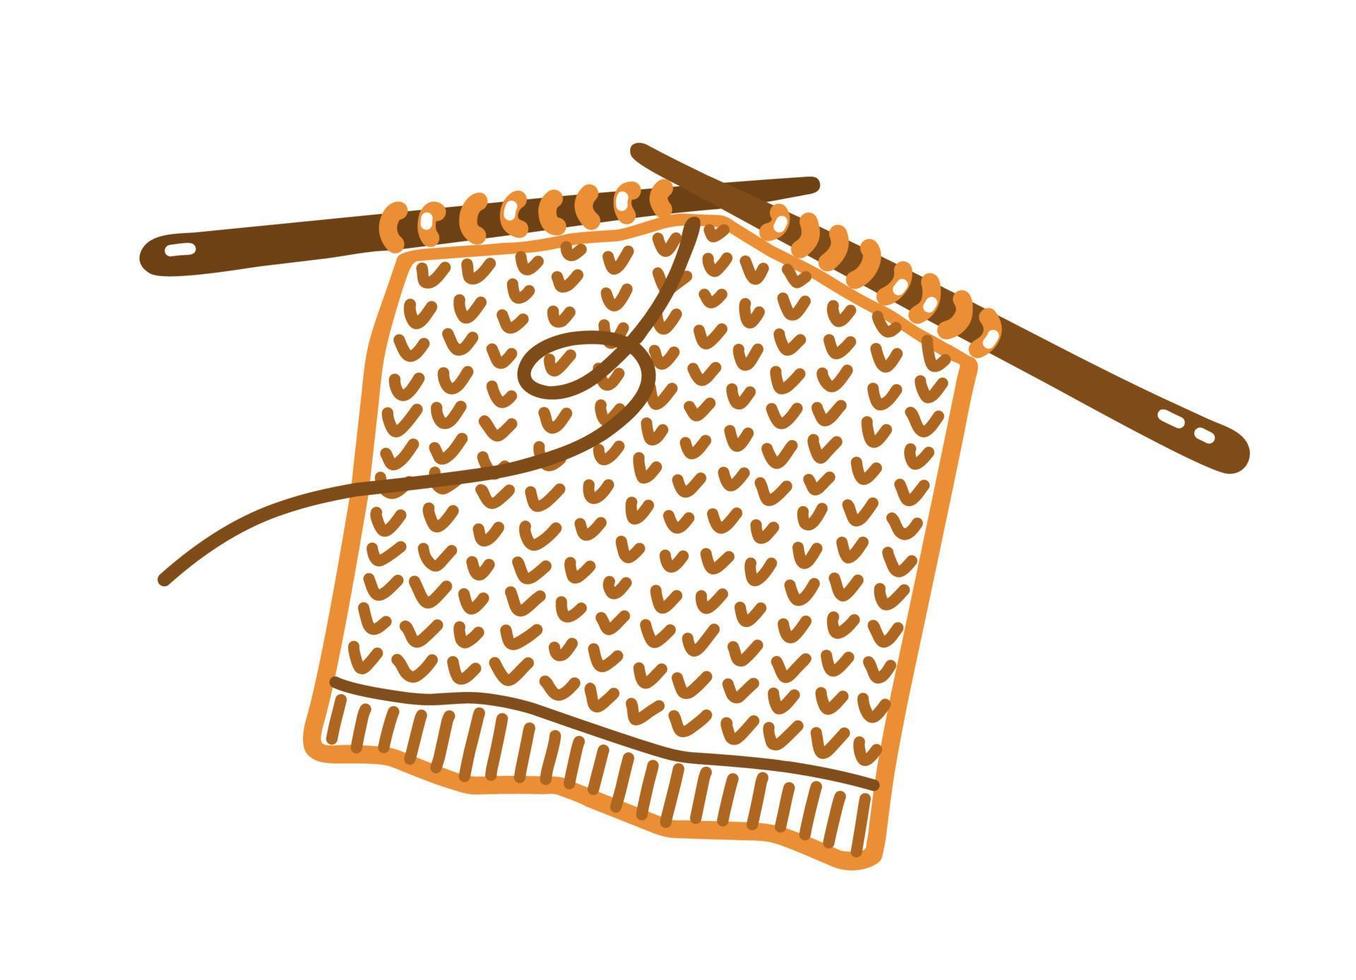 Knitting needles with wool fabric in doodle style vector